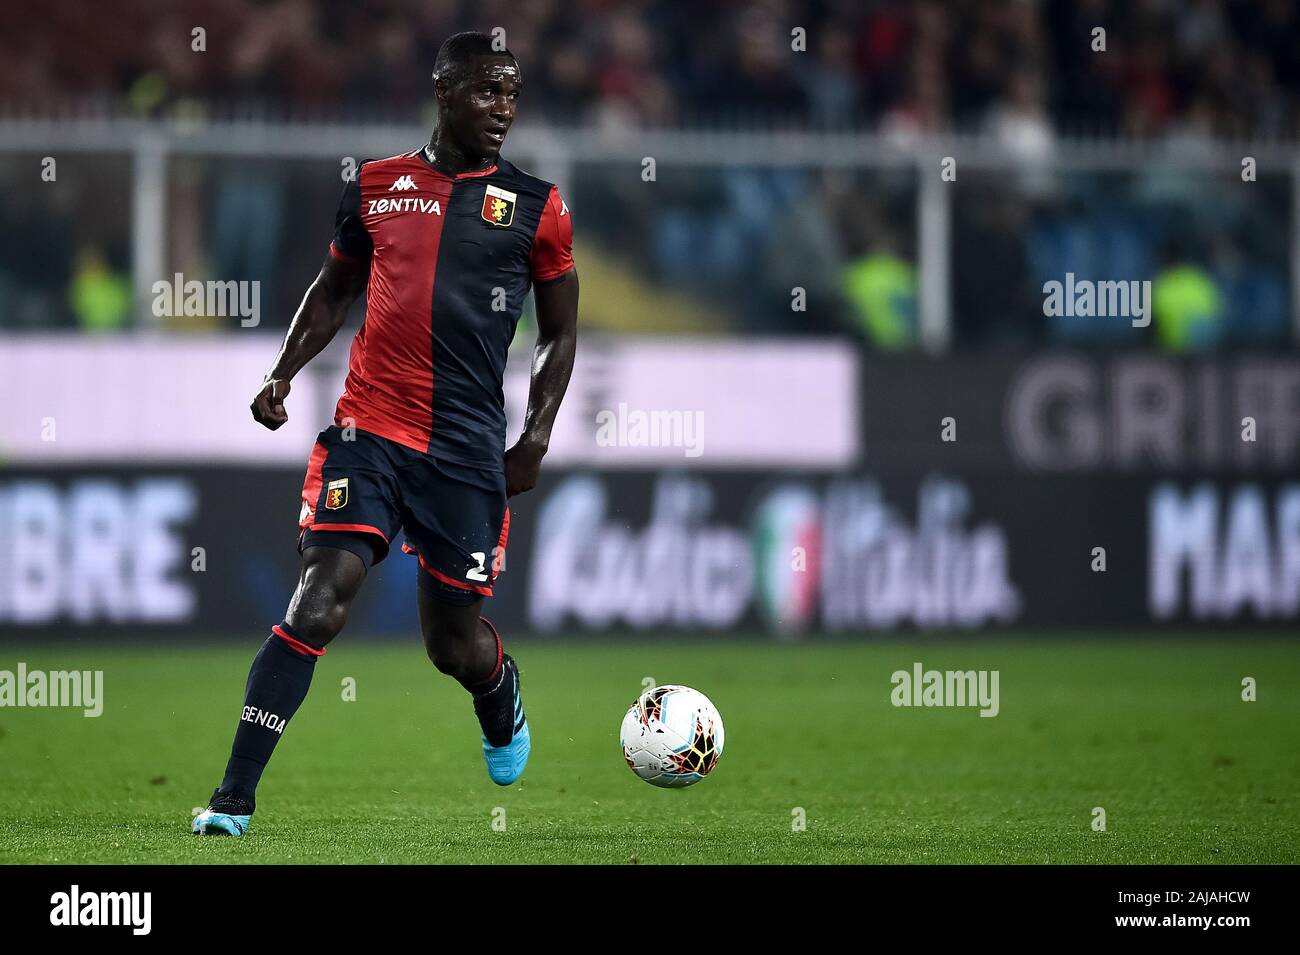 Genoa, Italy. 5 October, 2019: Cristian Zapata of Genoa CFC in action during the Serie A football match between Genoa CFC and AC Milan. AC Milan won 2-1 over Genoa CFC. Credit: Nicolò Campo/Alamy Live News Stock Photo